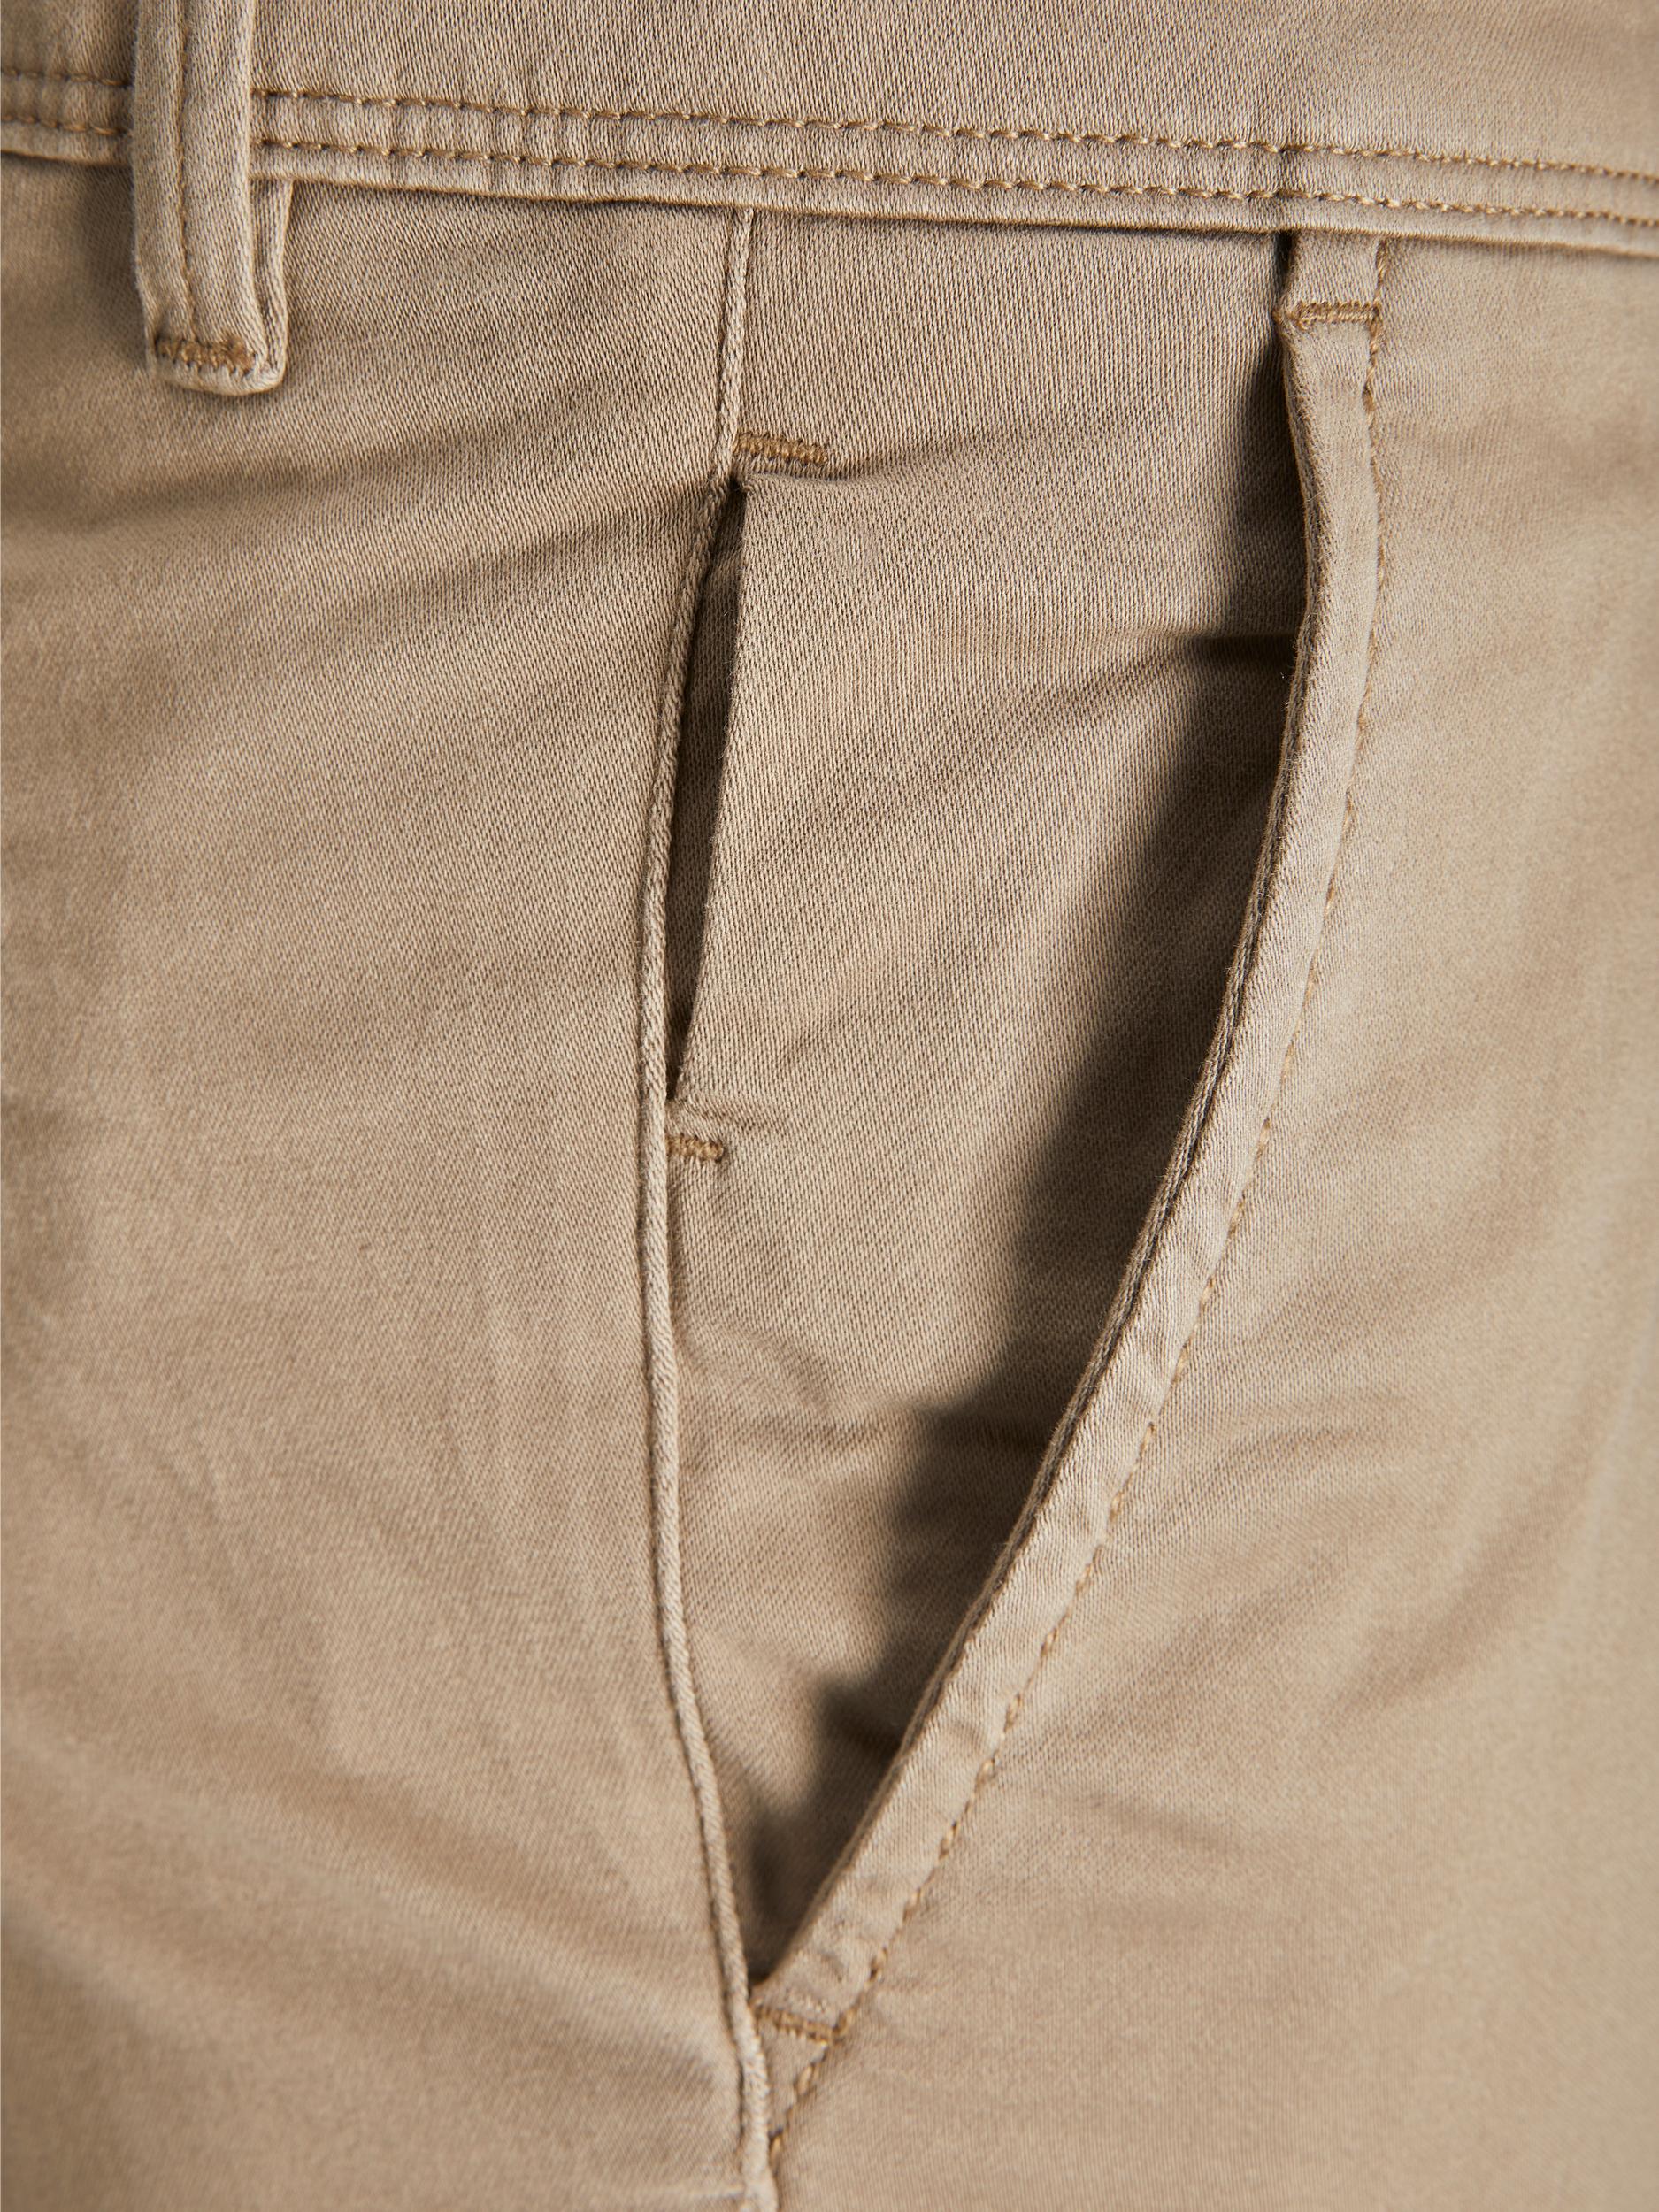 Marco Bowie Mens Beige Chino-Pocket View